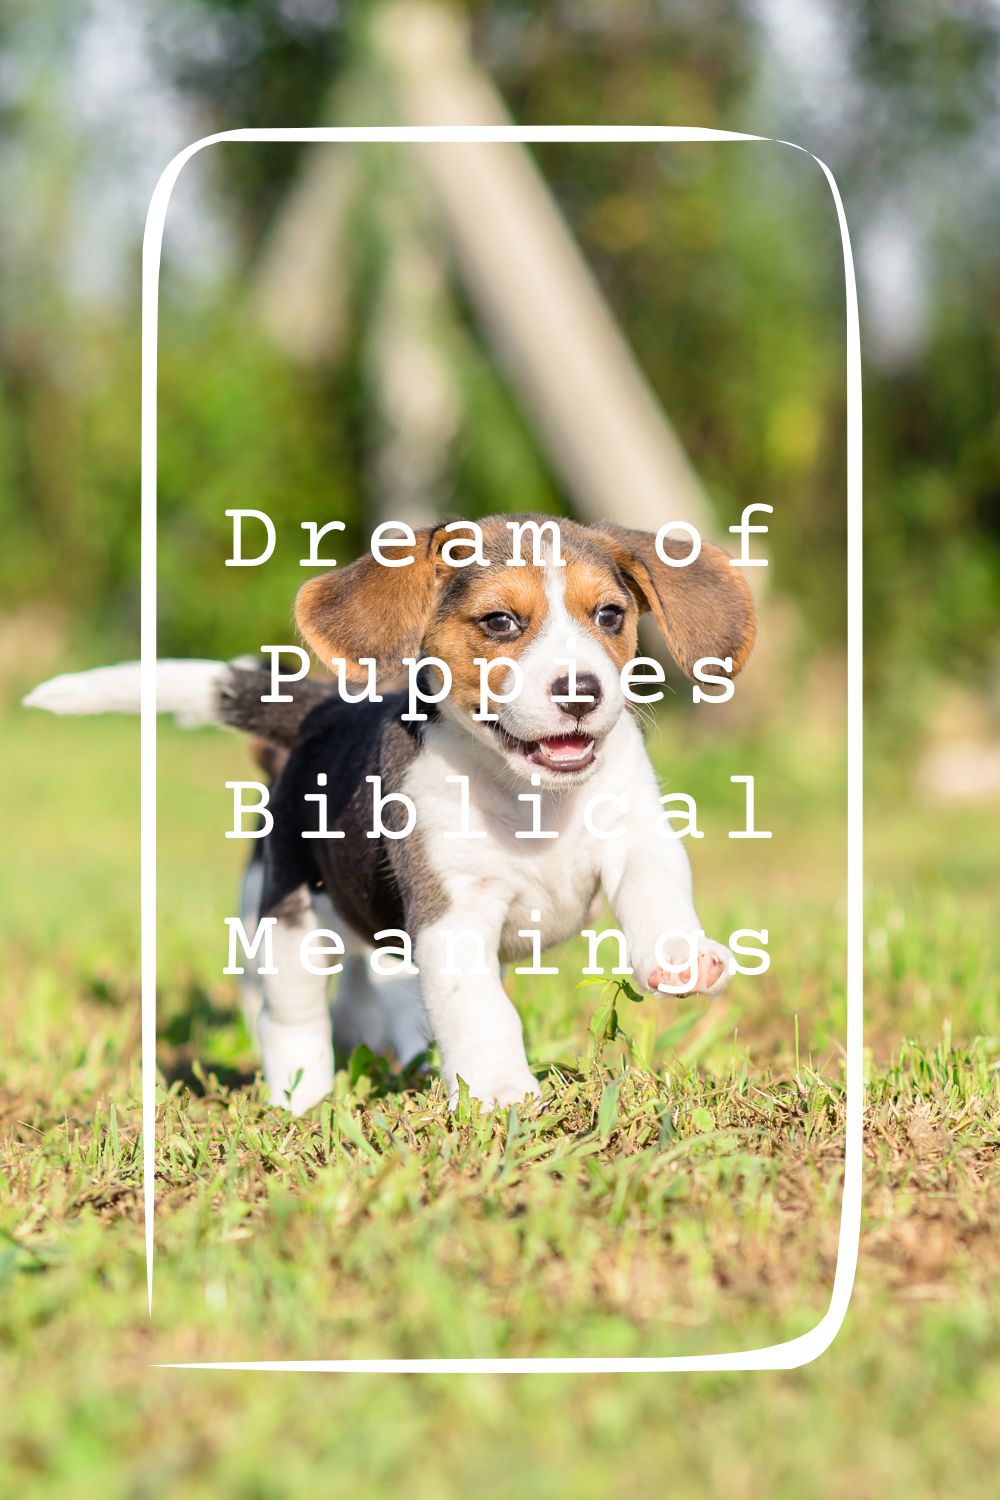 Dream of Puppies Biblical Meanings4